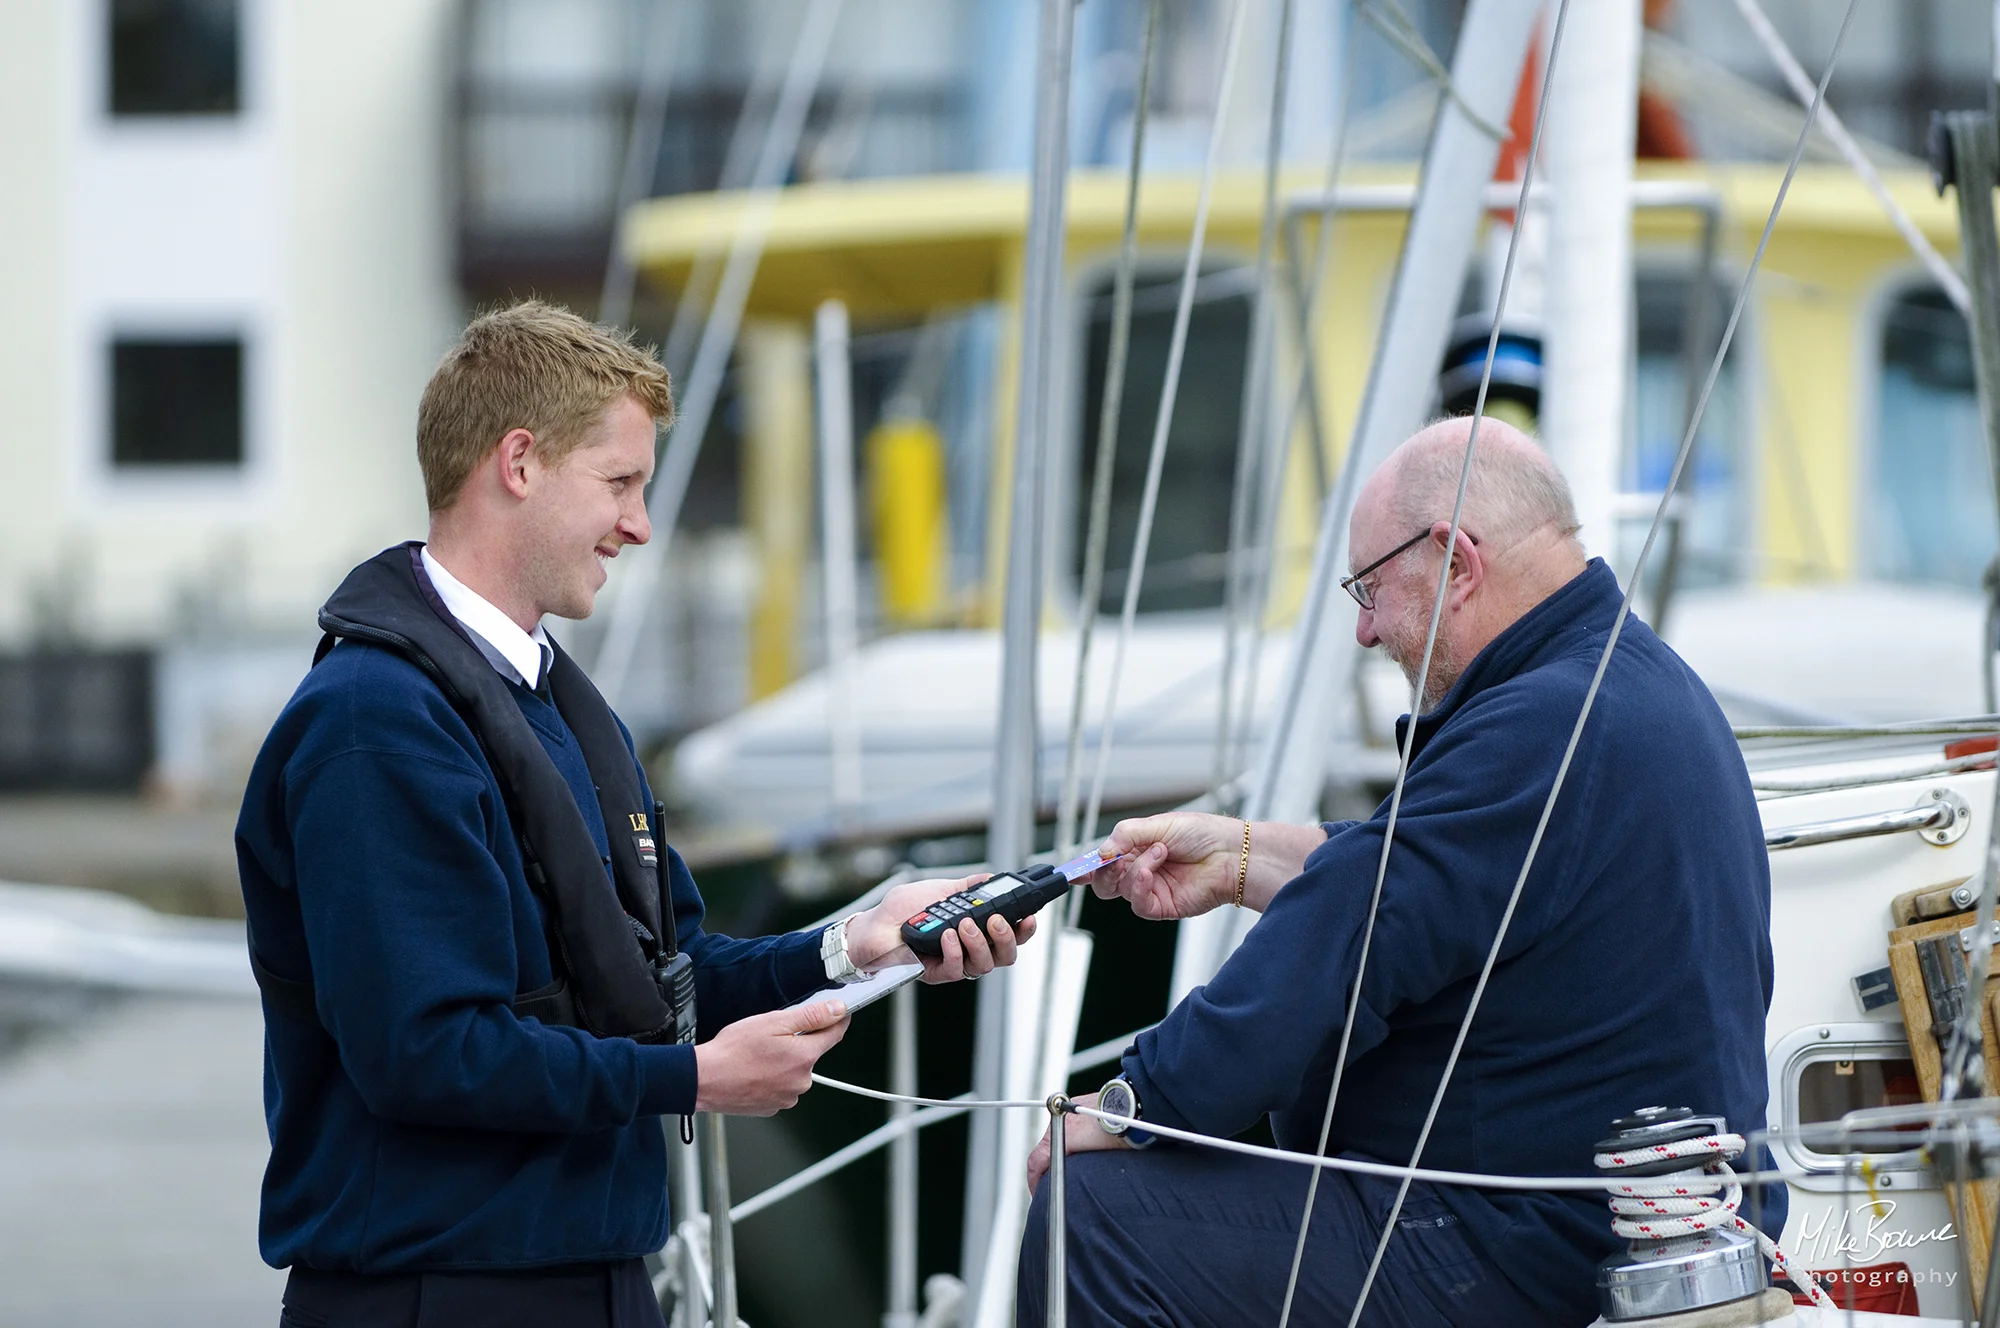 Yachtsman making a card payment to the harbourmaster